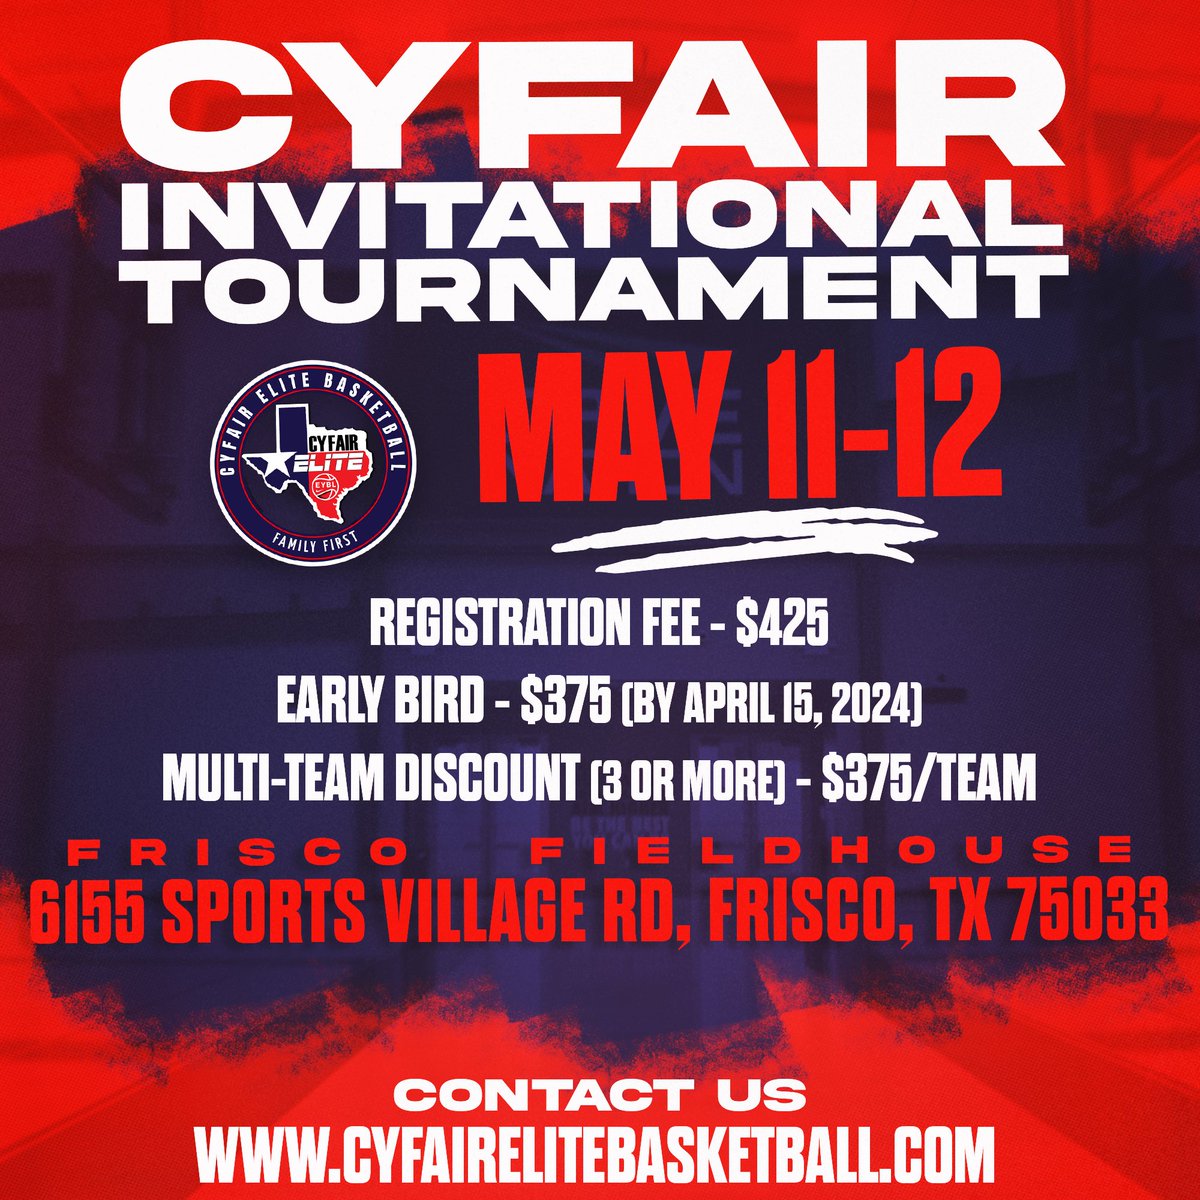 Register EARLY for the Cy Fair Invitational | National Media, Scouting Services, Real Matchups Great opportunity.